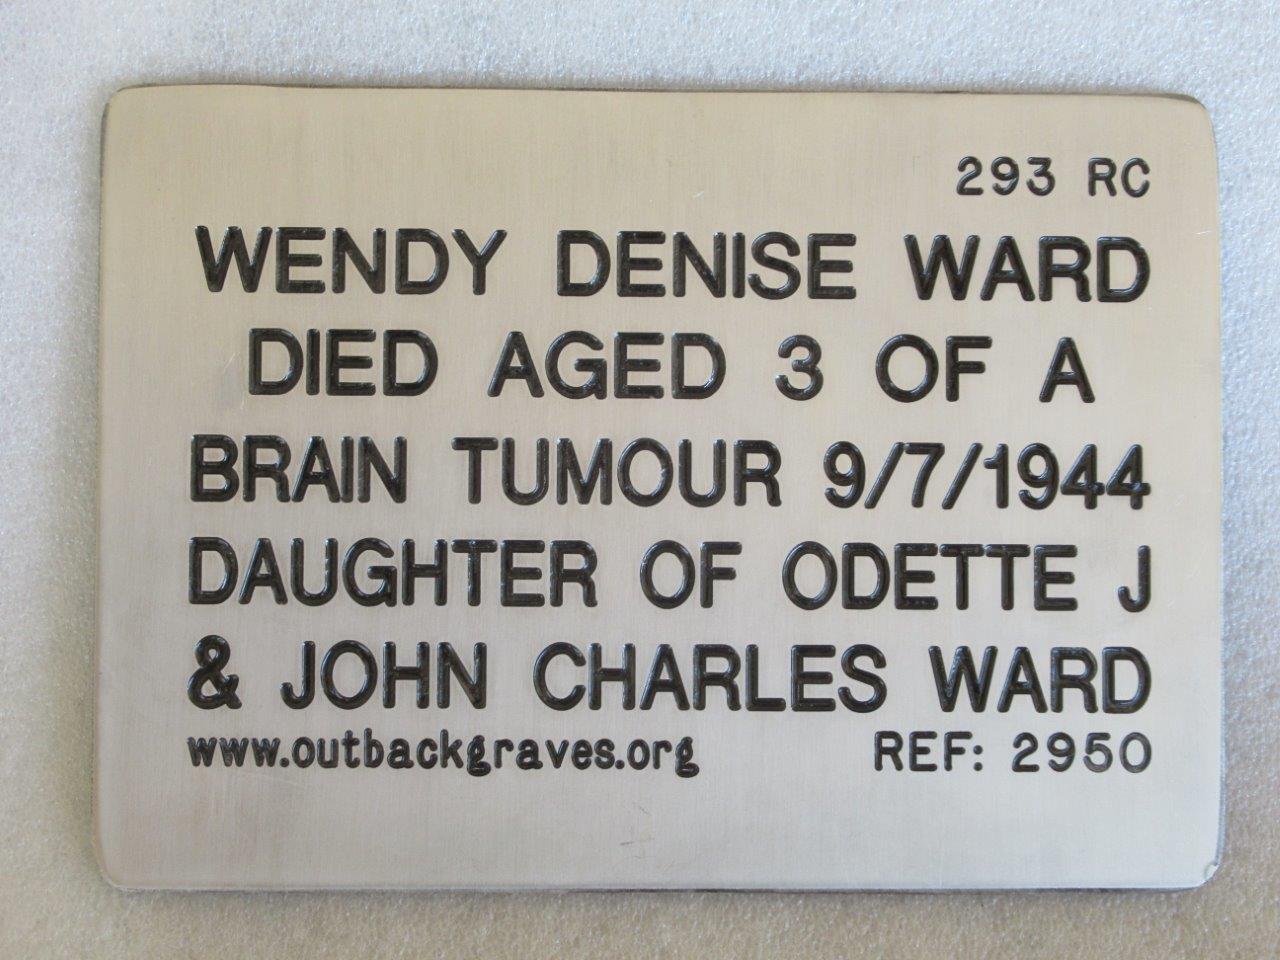 This is a photograph of plaque number 2950 for WENDY DENISE WARD at LEONORA